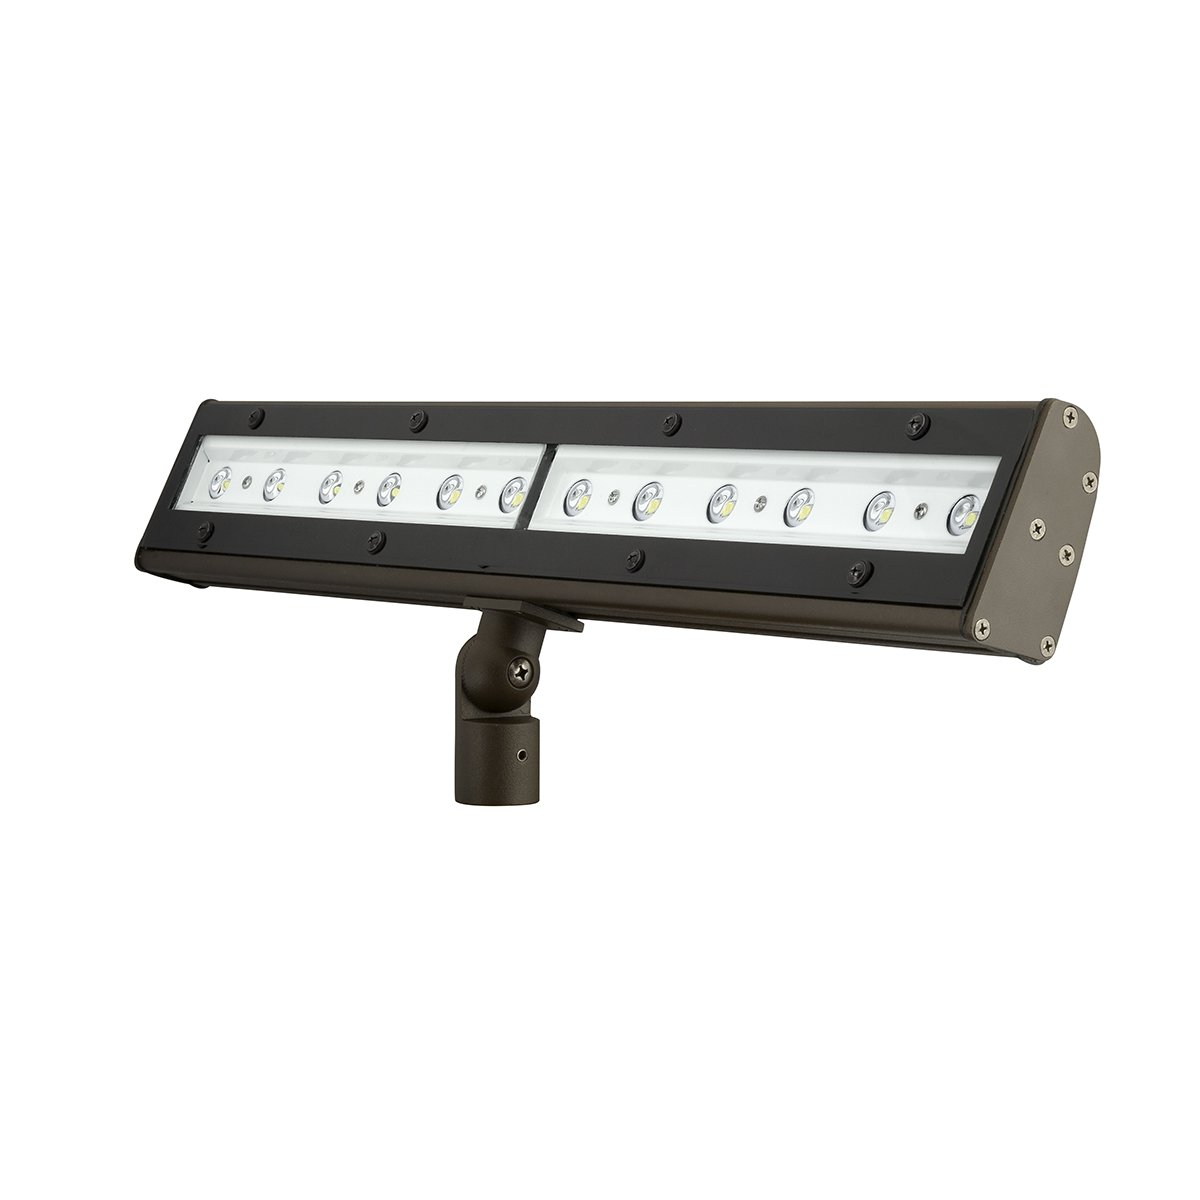 ALF is ideal for small floodlighting applications such as signs, facade, landscape accent or small area illumination to be easily hidden or blend into the landscape environment.